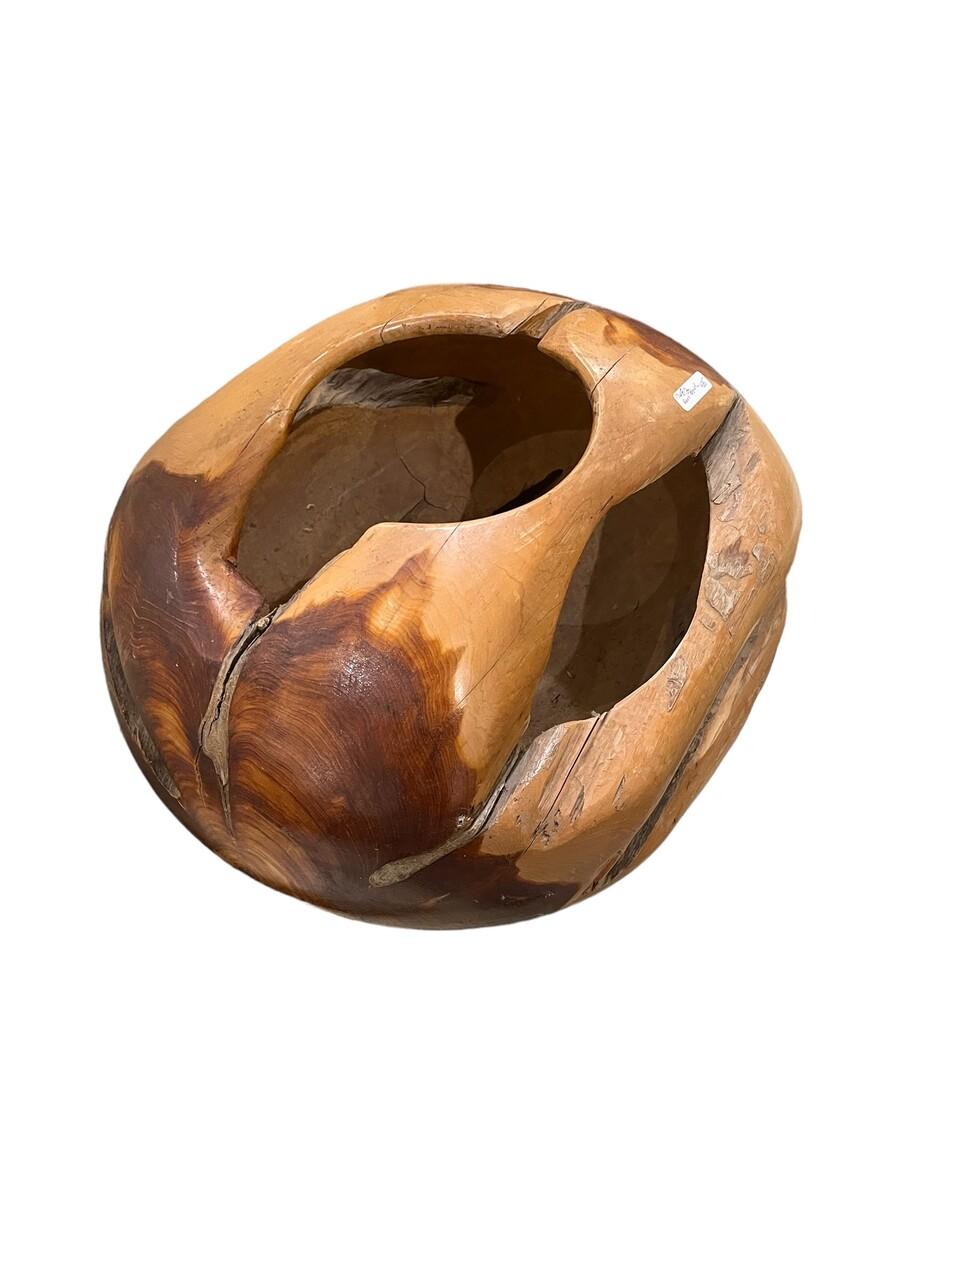 Unknown Large Hand Carved and Polished Burl Root Sphere Sculpture For Sale